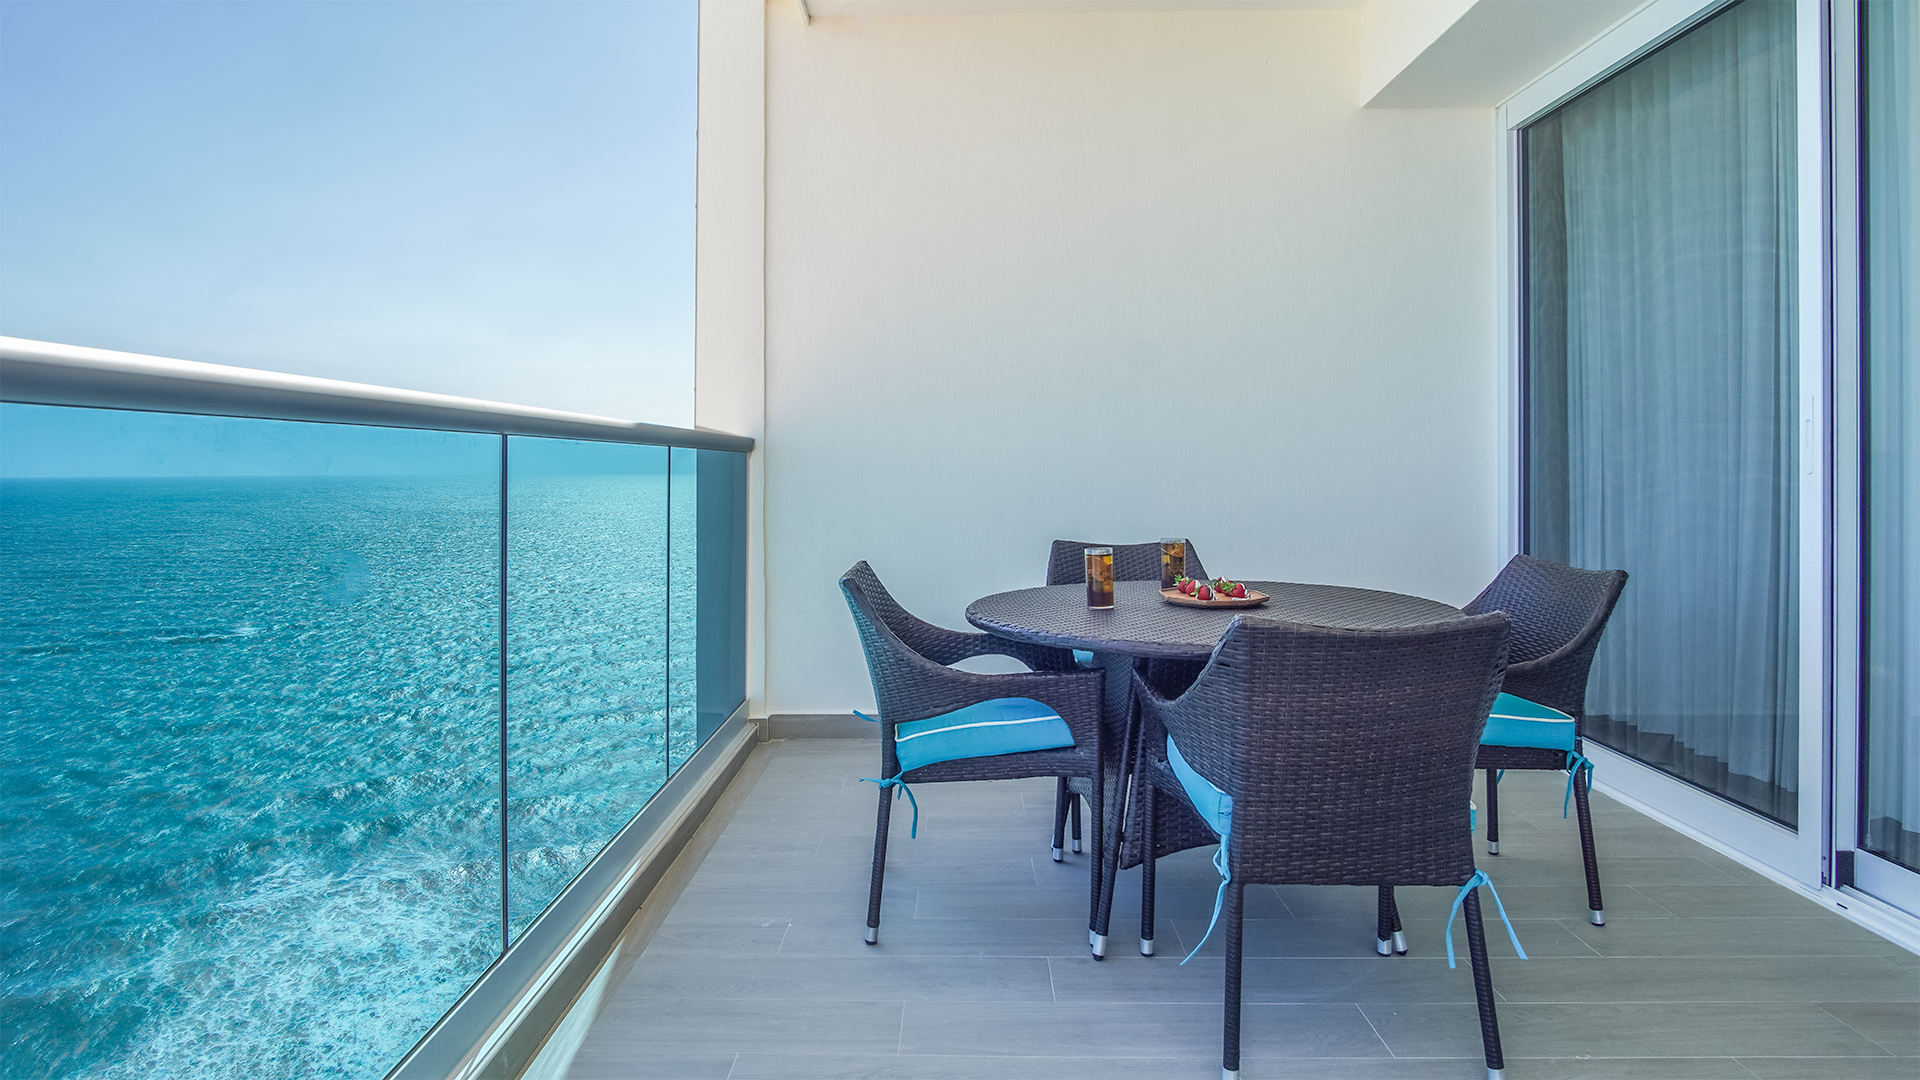 Dining table and the ocean beyond.